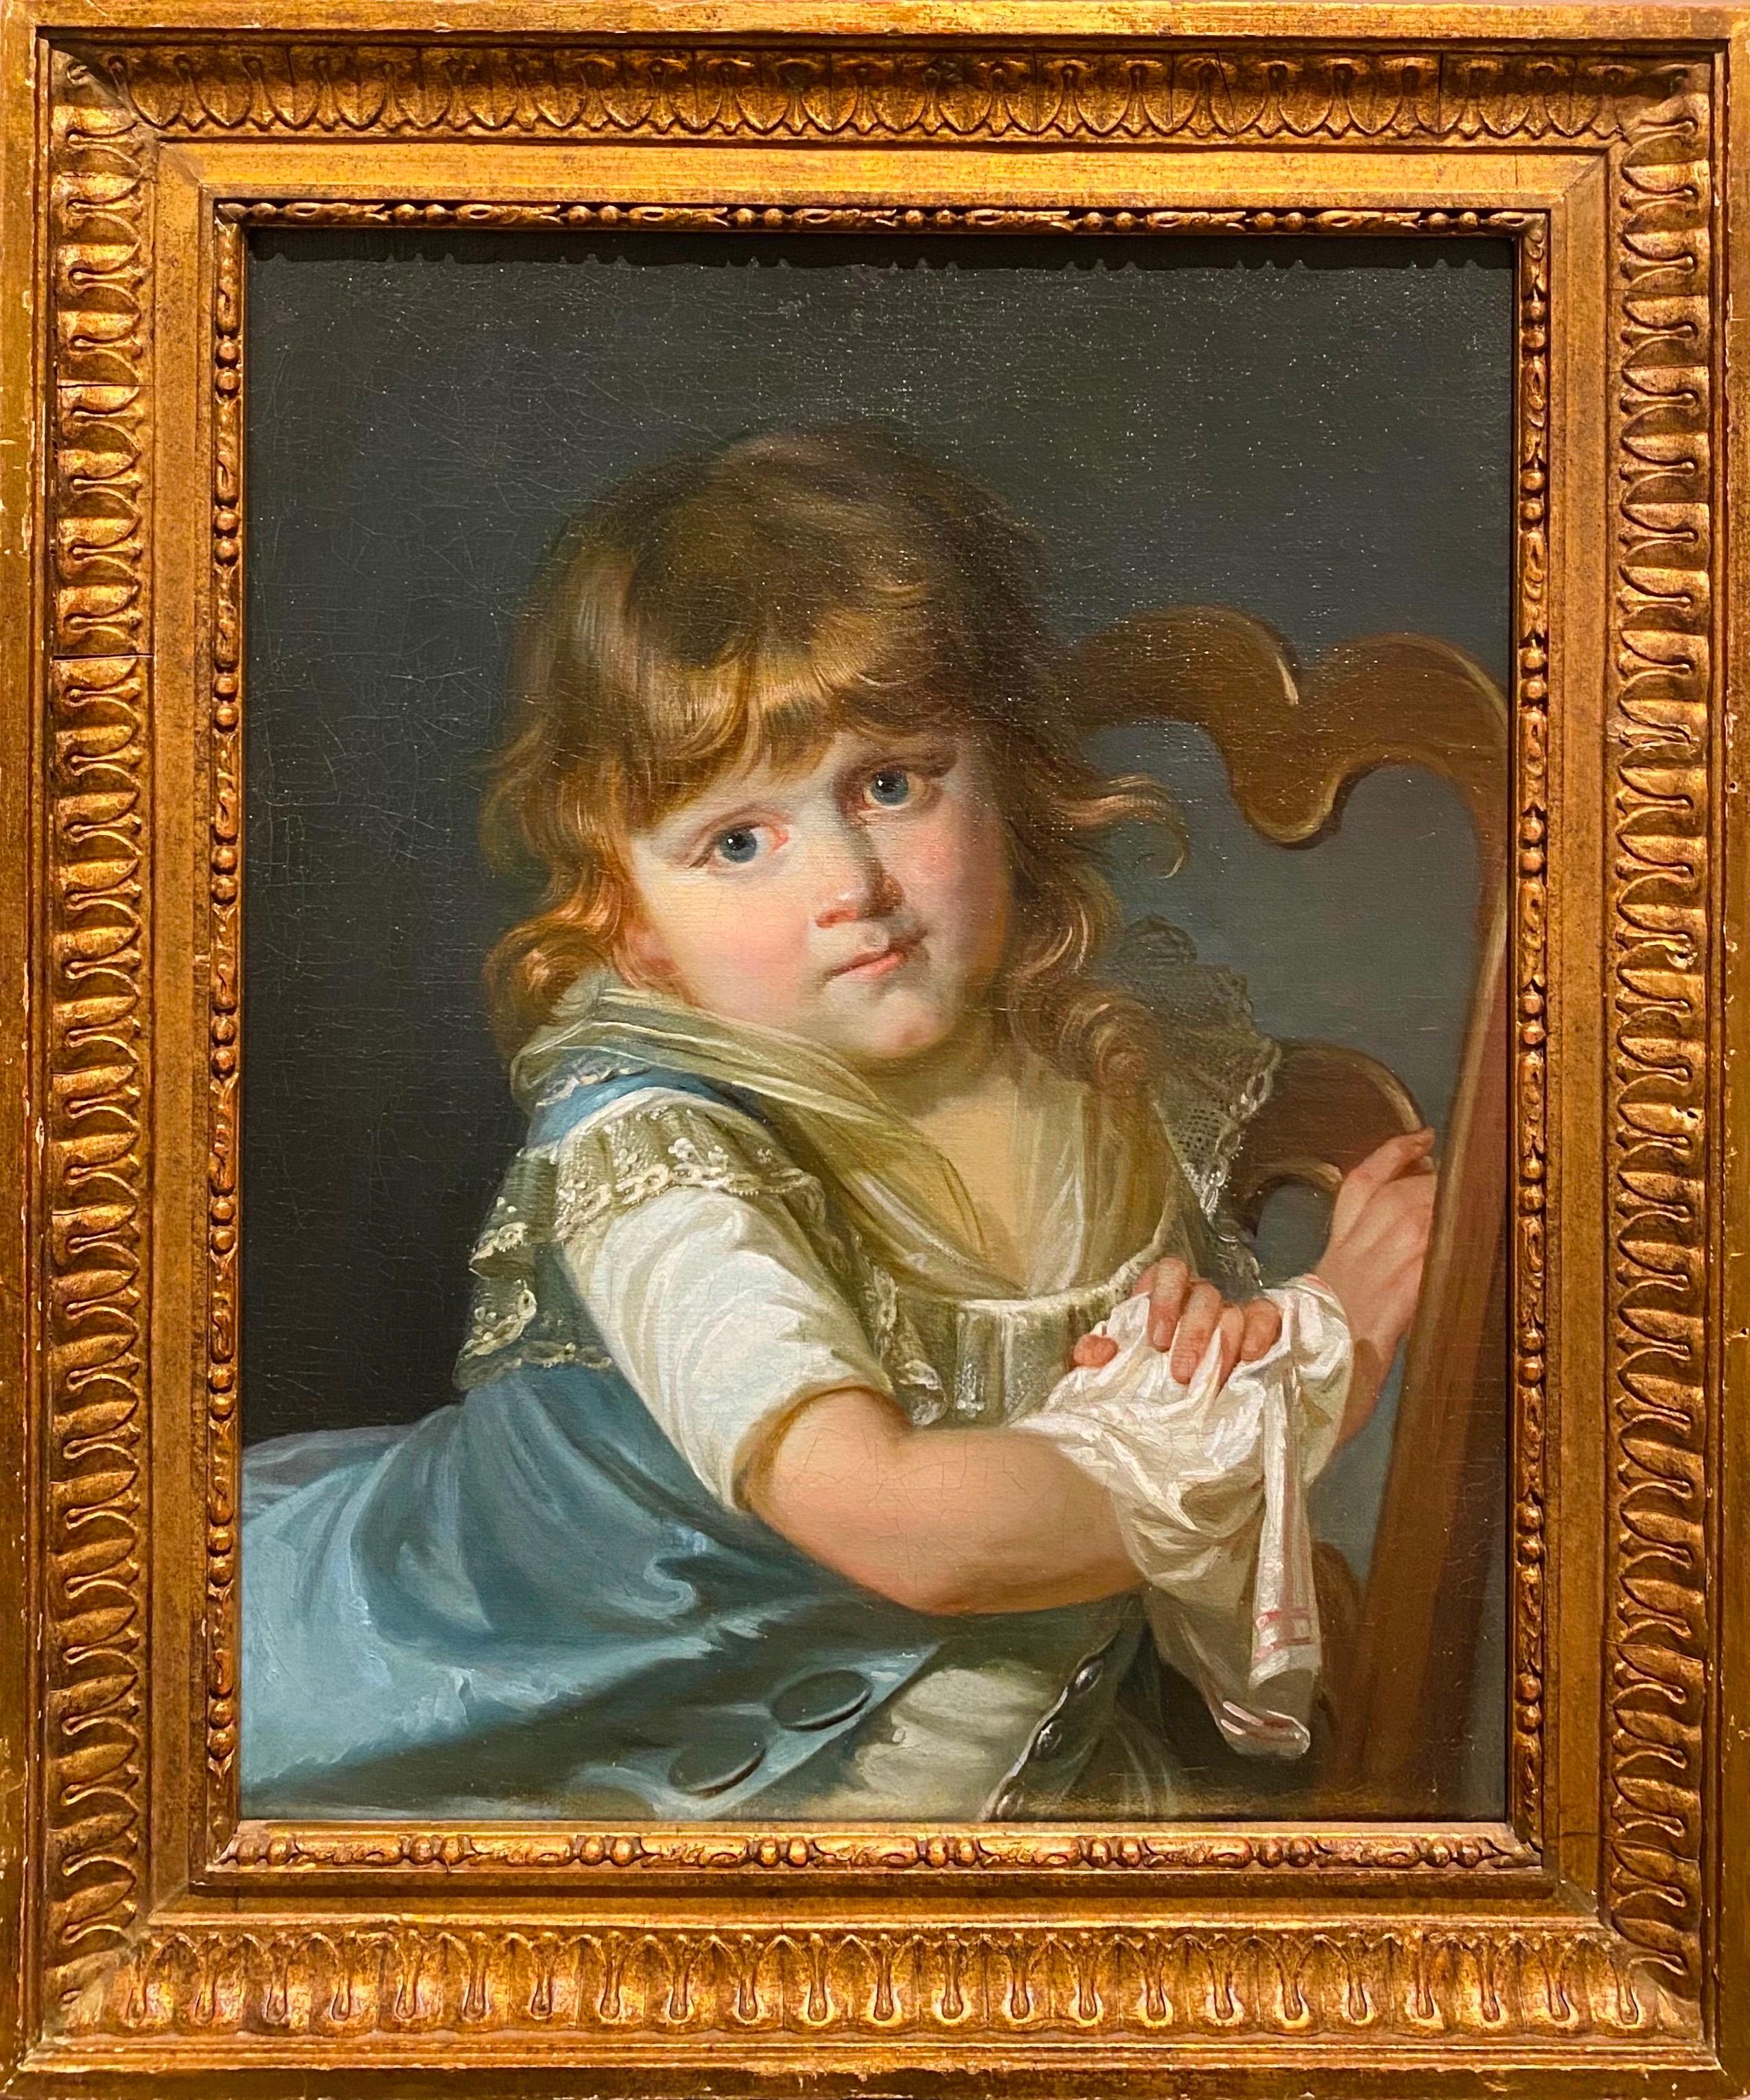 Jeanne Philiberte Ledoux Figurative Painting - 18th century French Portrait painting of a girl - Wildenstein Female artist